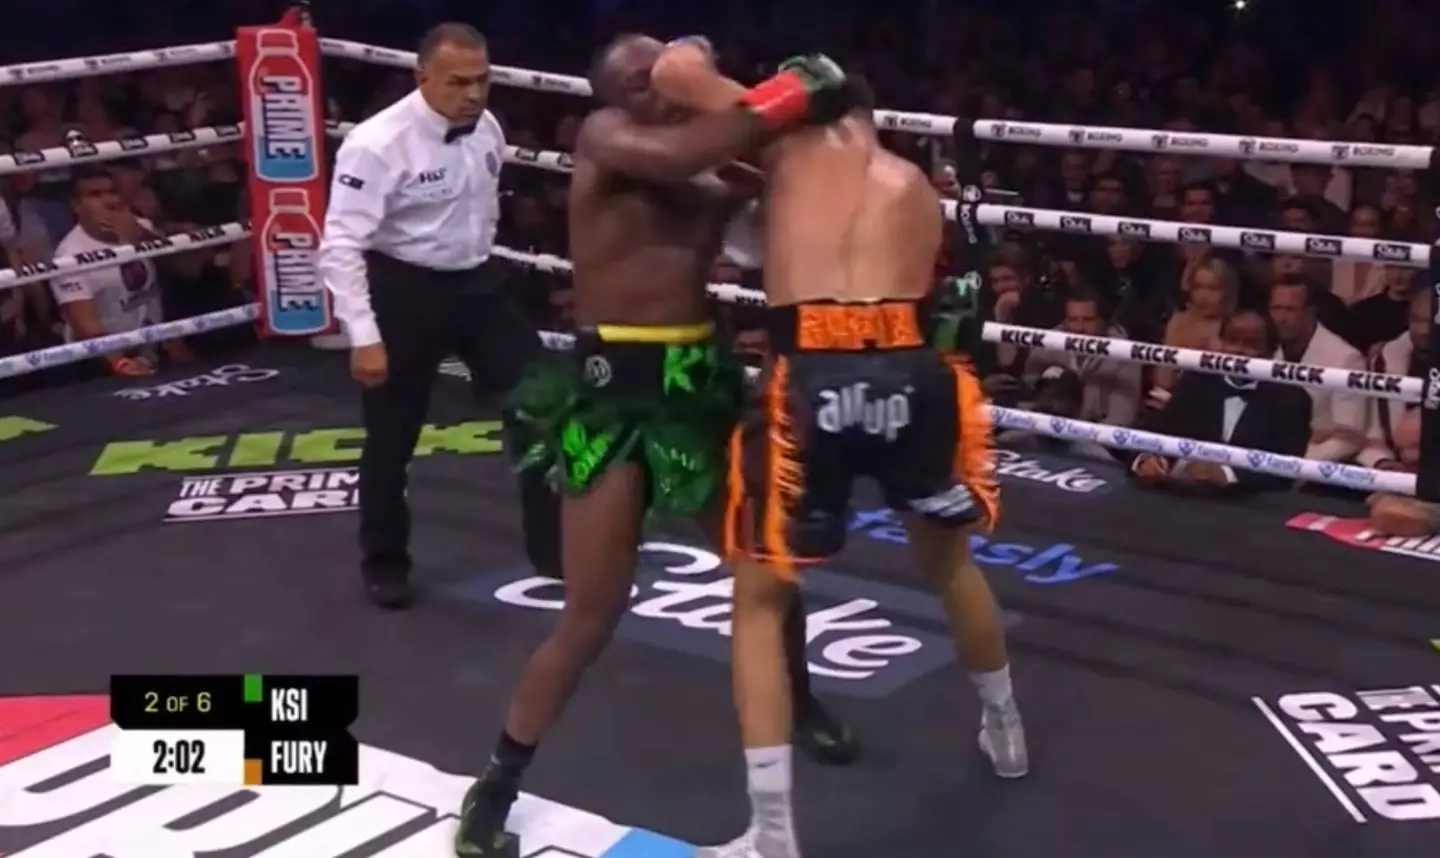 KSI appeared to deliver a number of blows to the back of Tommy Fury's head.